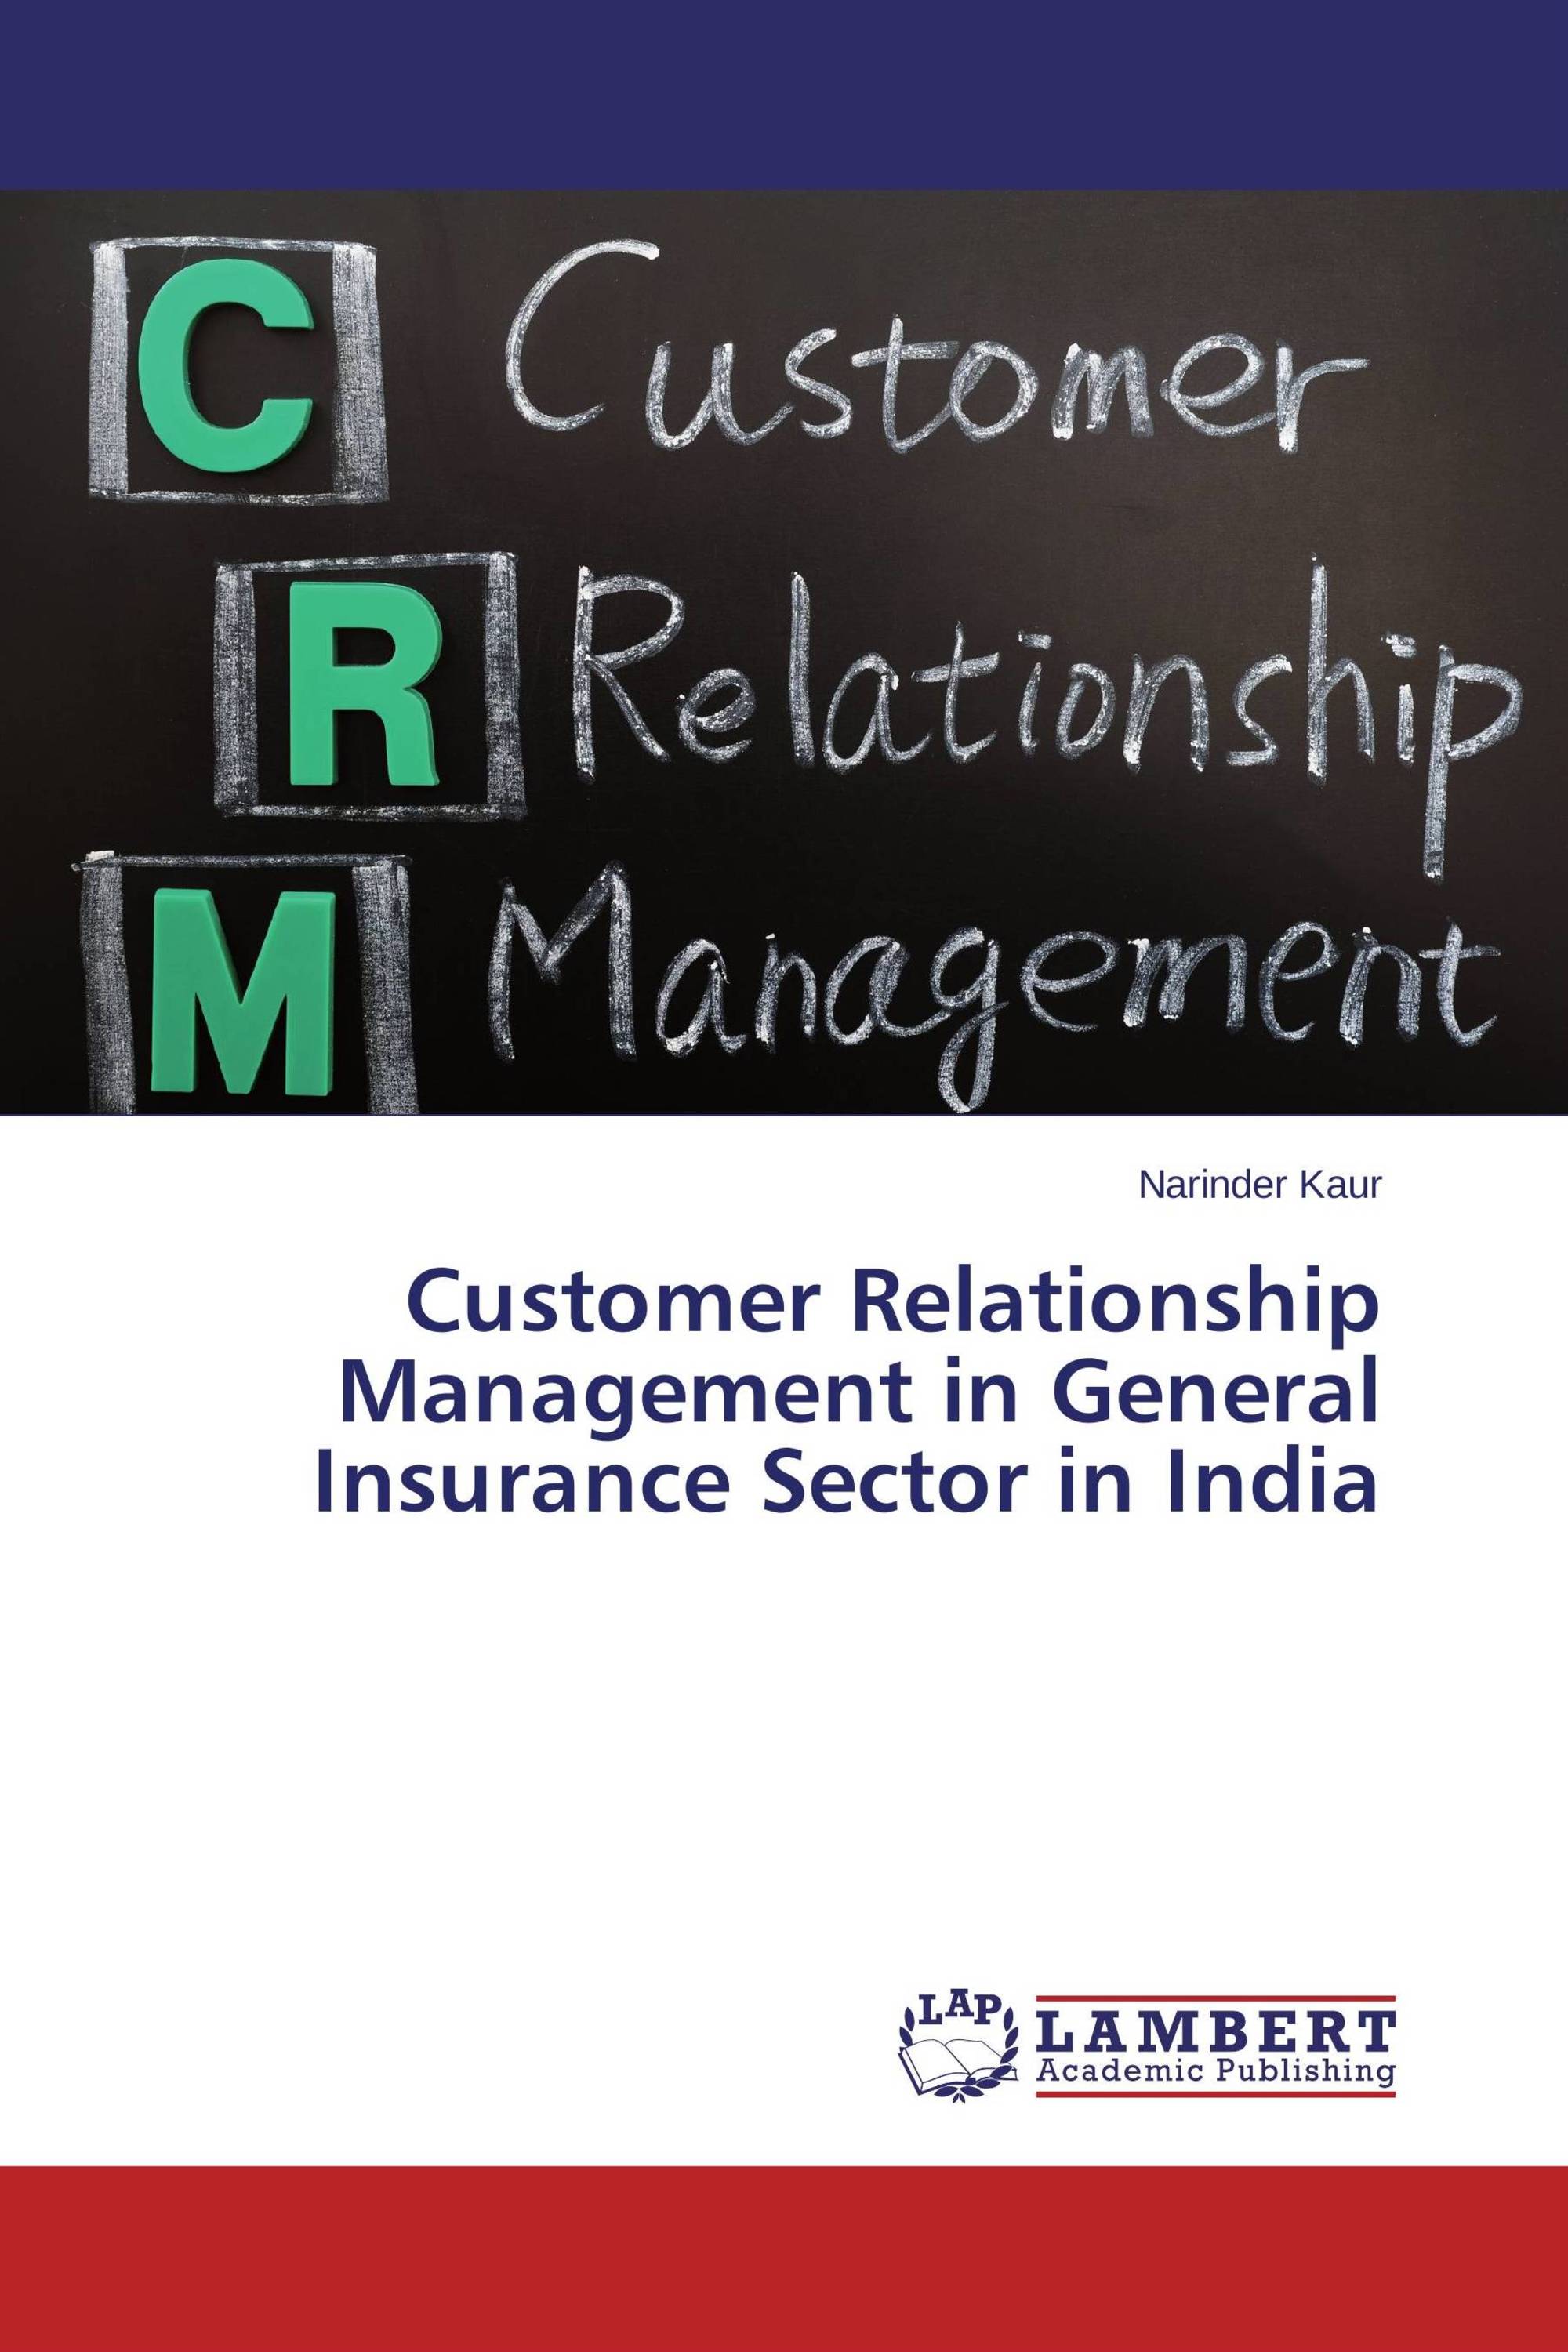 literature review on insurance sector in india